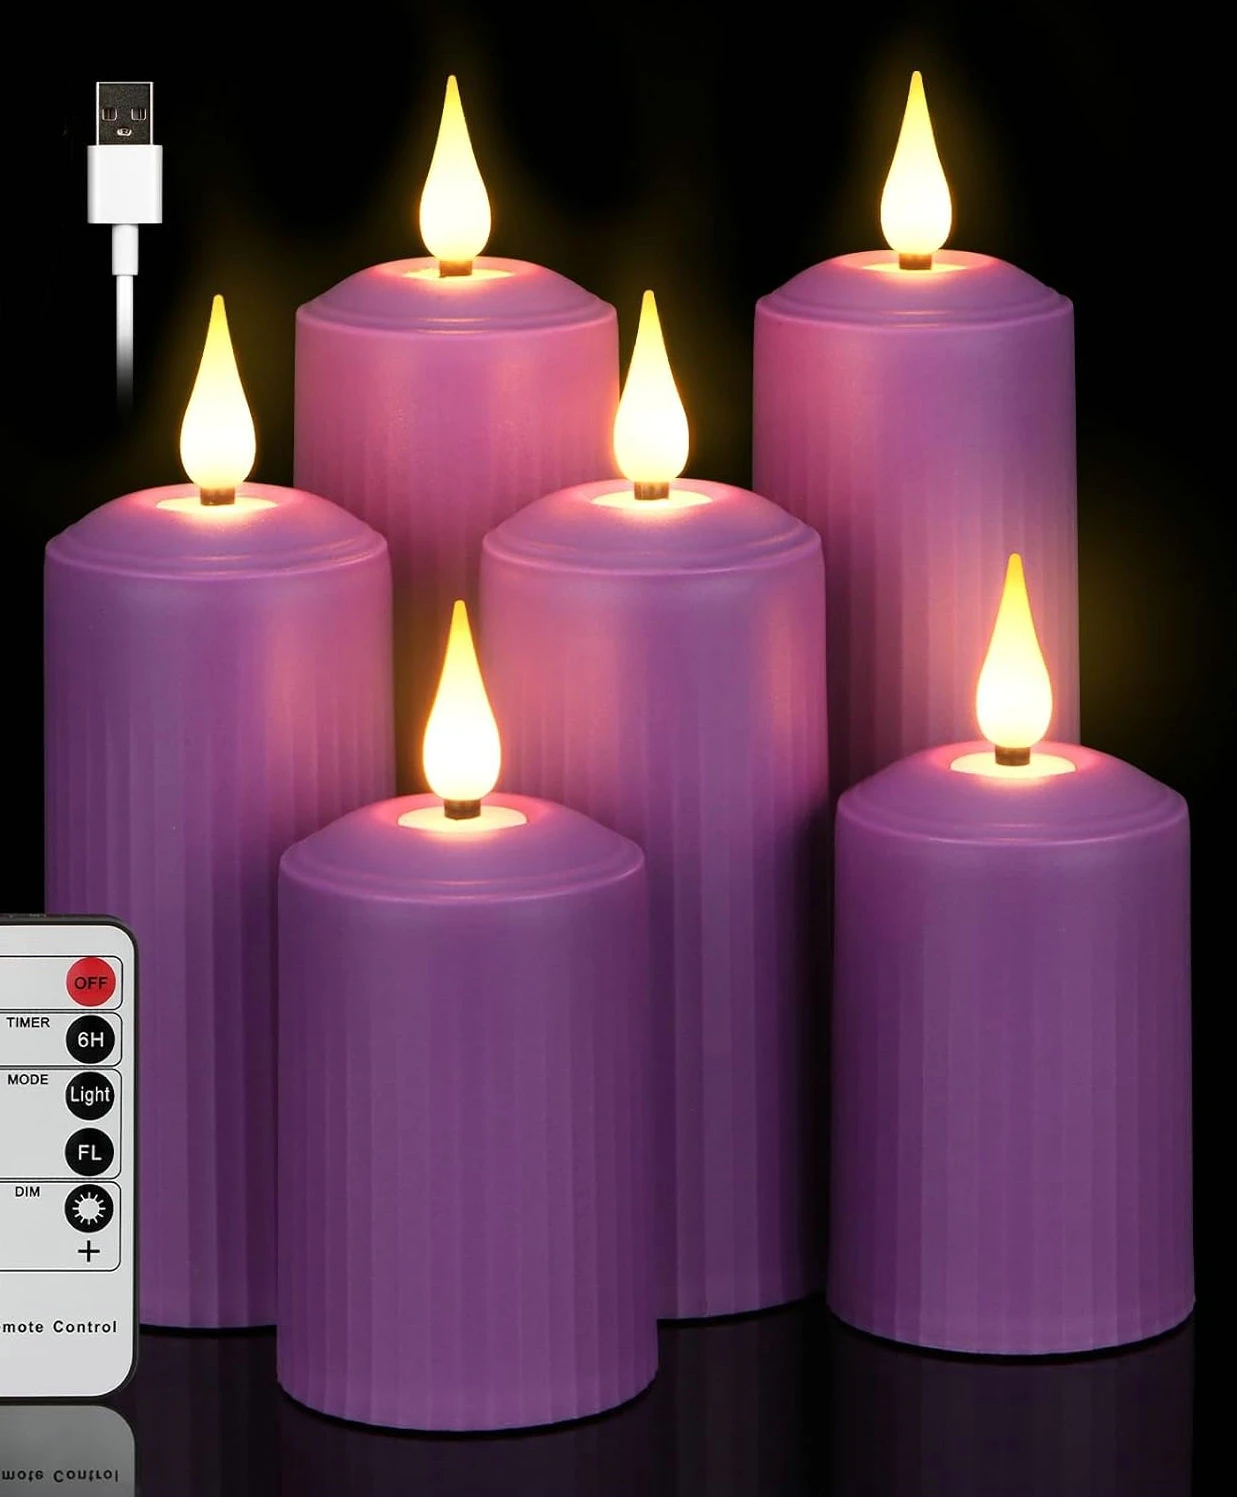 

Set of 9 USB Rechargeable Remote controlled w/timer led Candle Flameless Roman Pillar Candle Outdoor Waterproof Candles Light